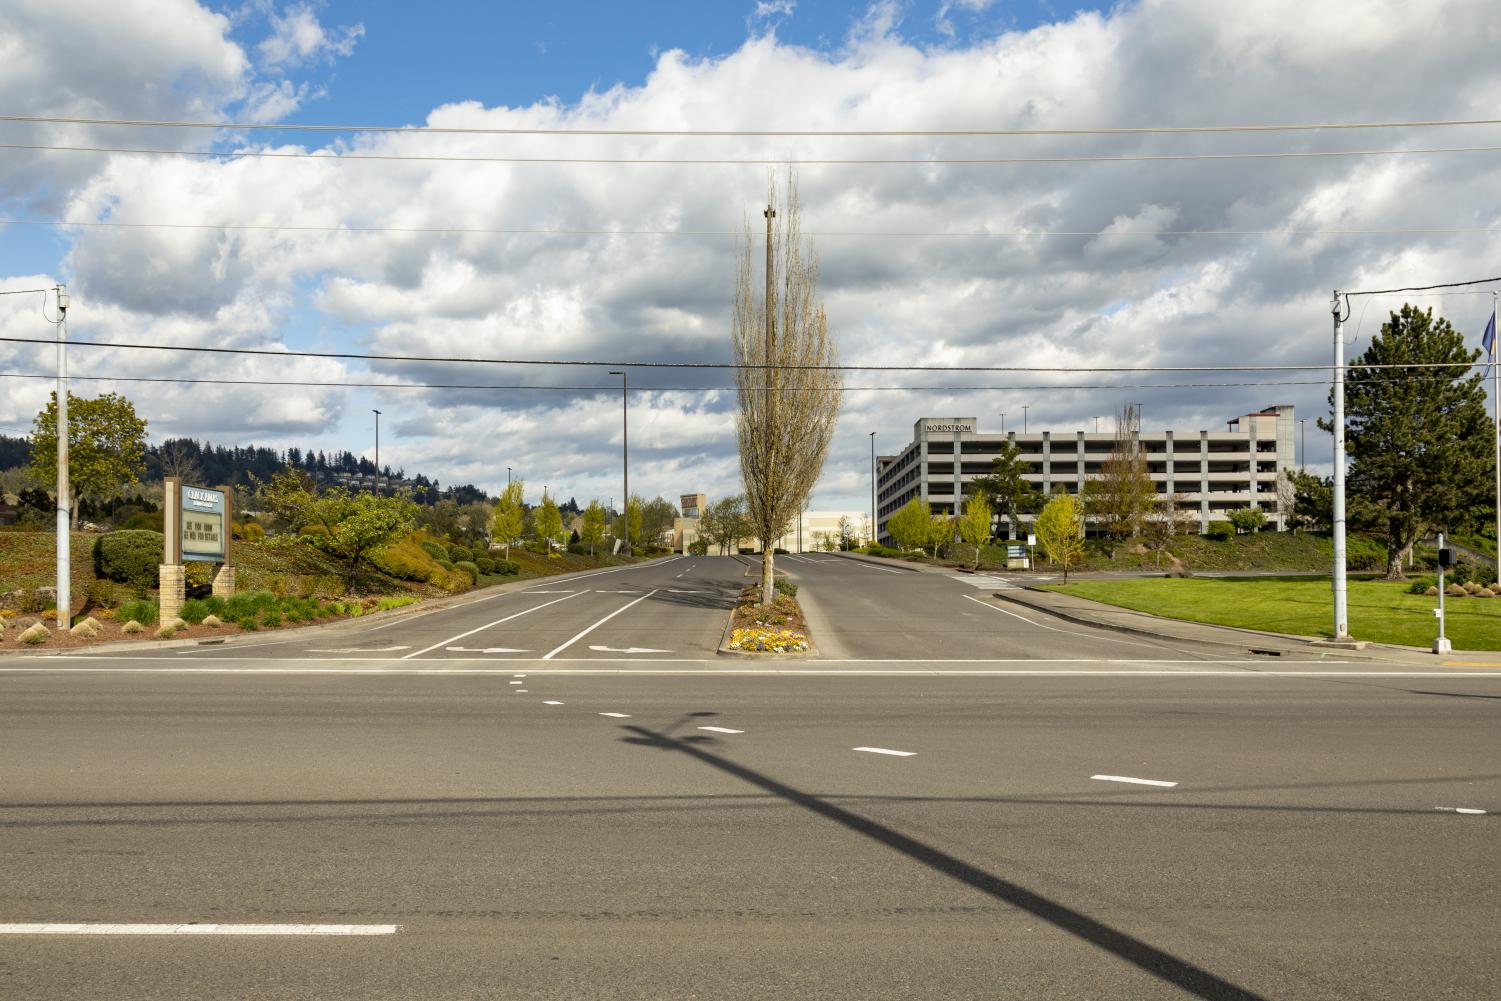 Deserted+Streets+and+Empty+Parking+Lots%3A+COVID-19+Sweeps+Across+Clackamas